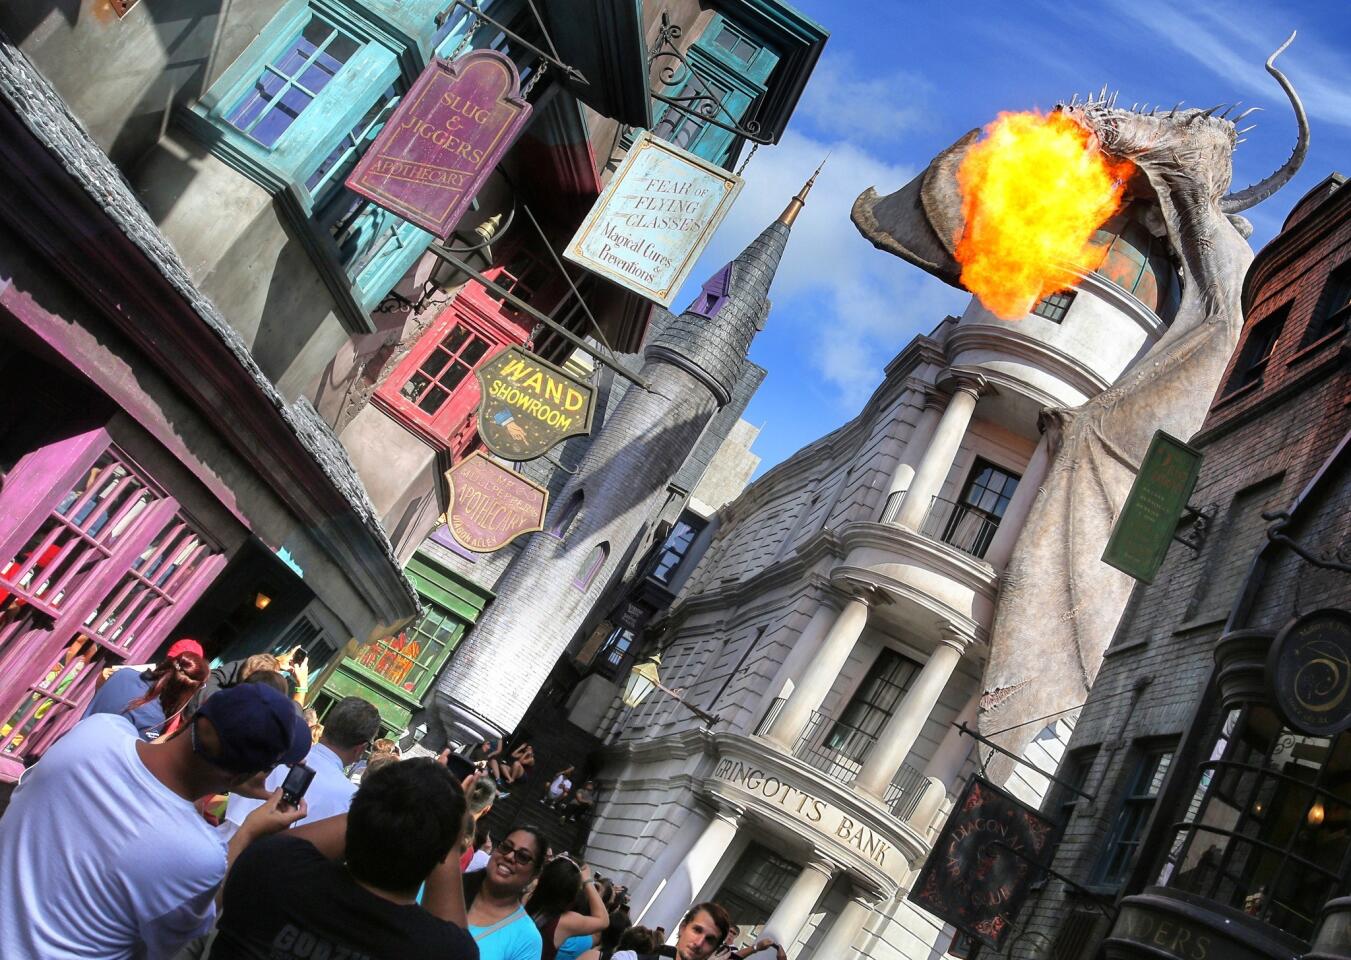 The fire-breathing dragon, perched on top of Diagon Alley, as seen during the grand opening at the Wizarding World of Harry Potter expansion, at Universal Studios Florida, in Orlando, Tuesday, July 8, 2014. (Joe Burbank/Orlando Sentinel) B583850553Z.1